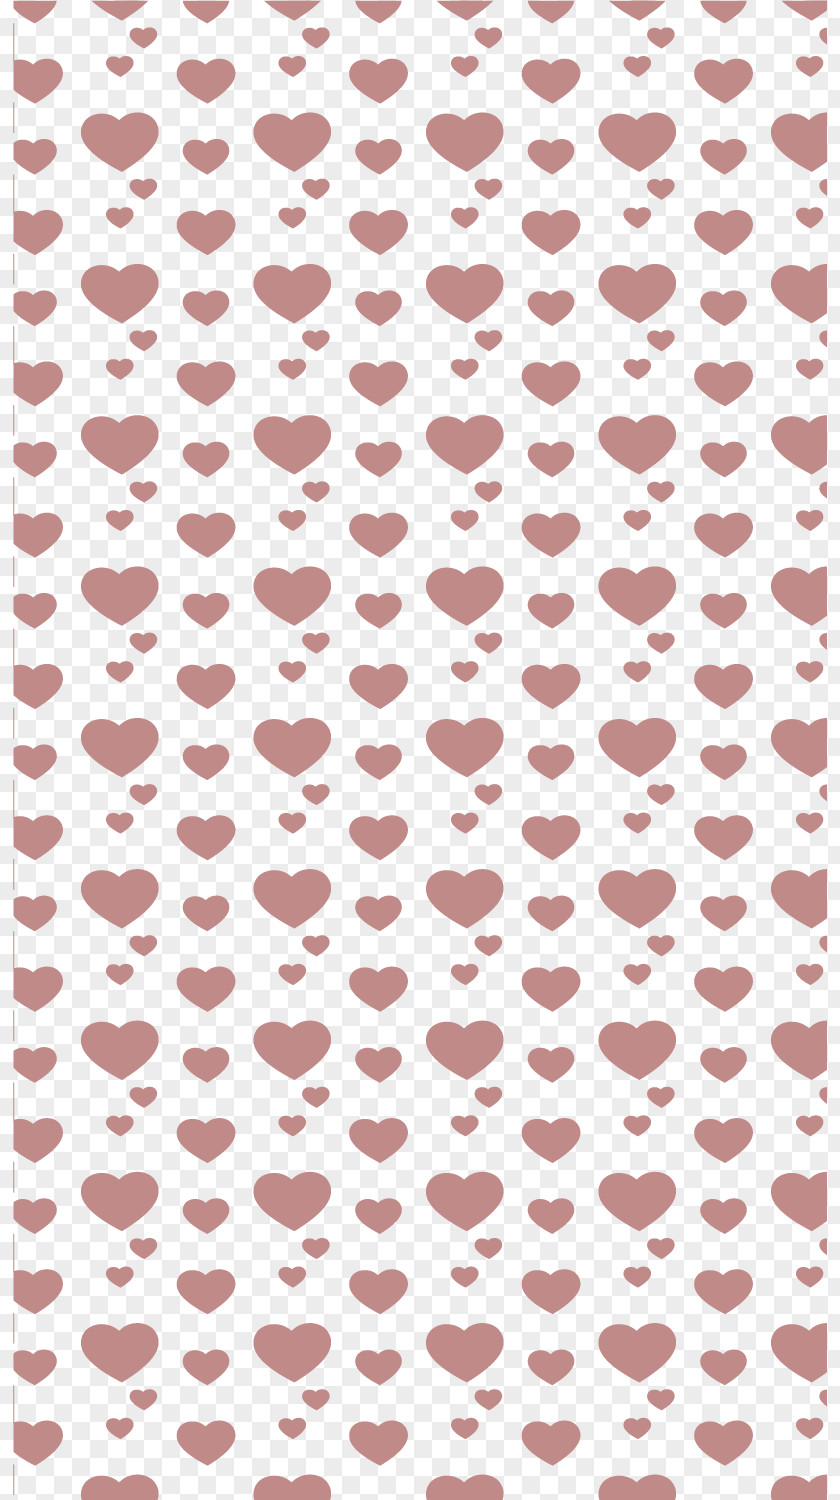 Valentine's Heart-shaped Decorative Vector PNG